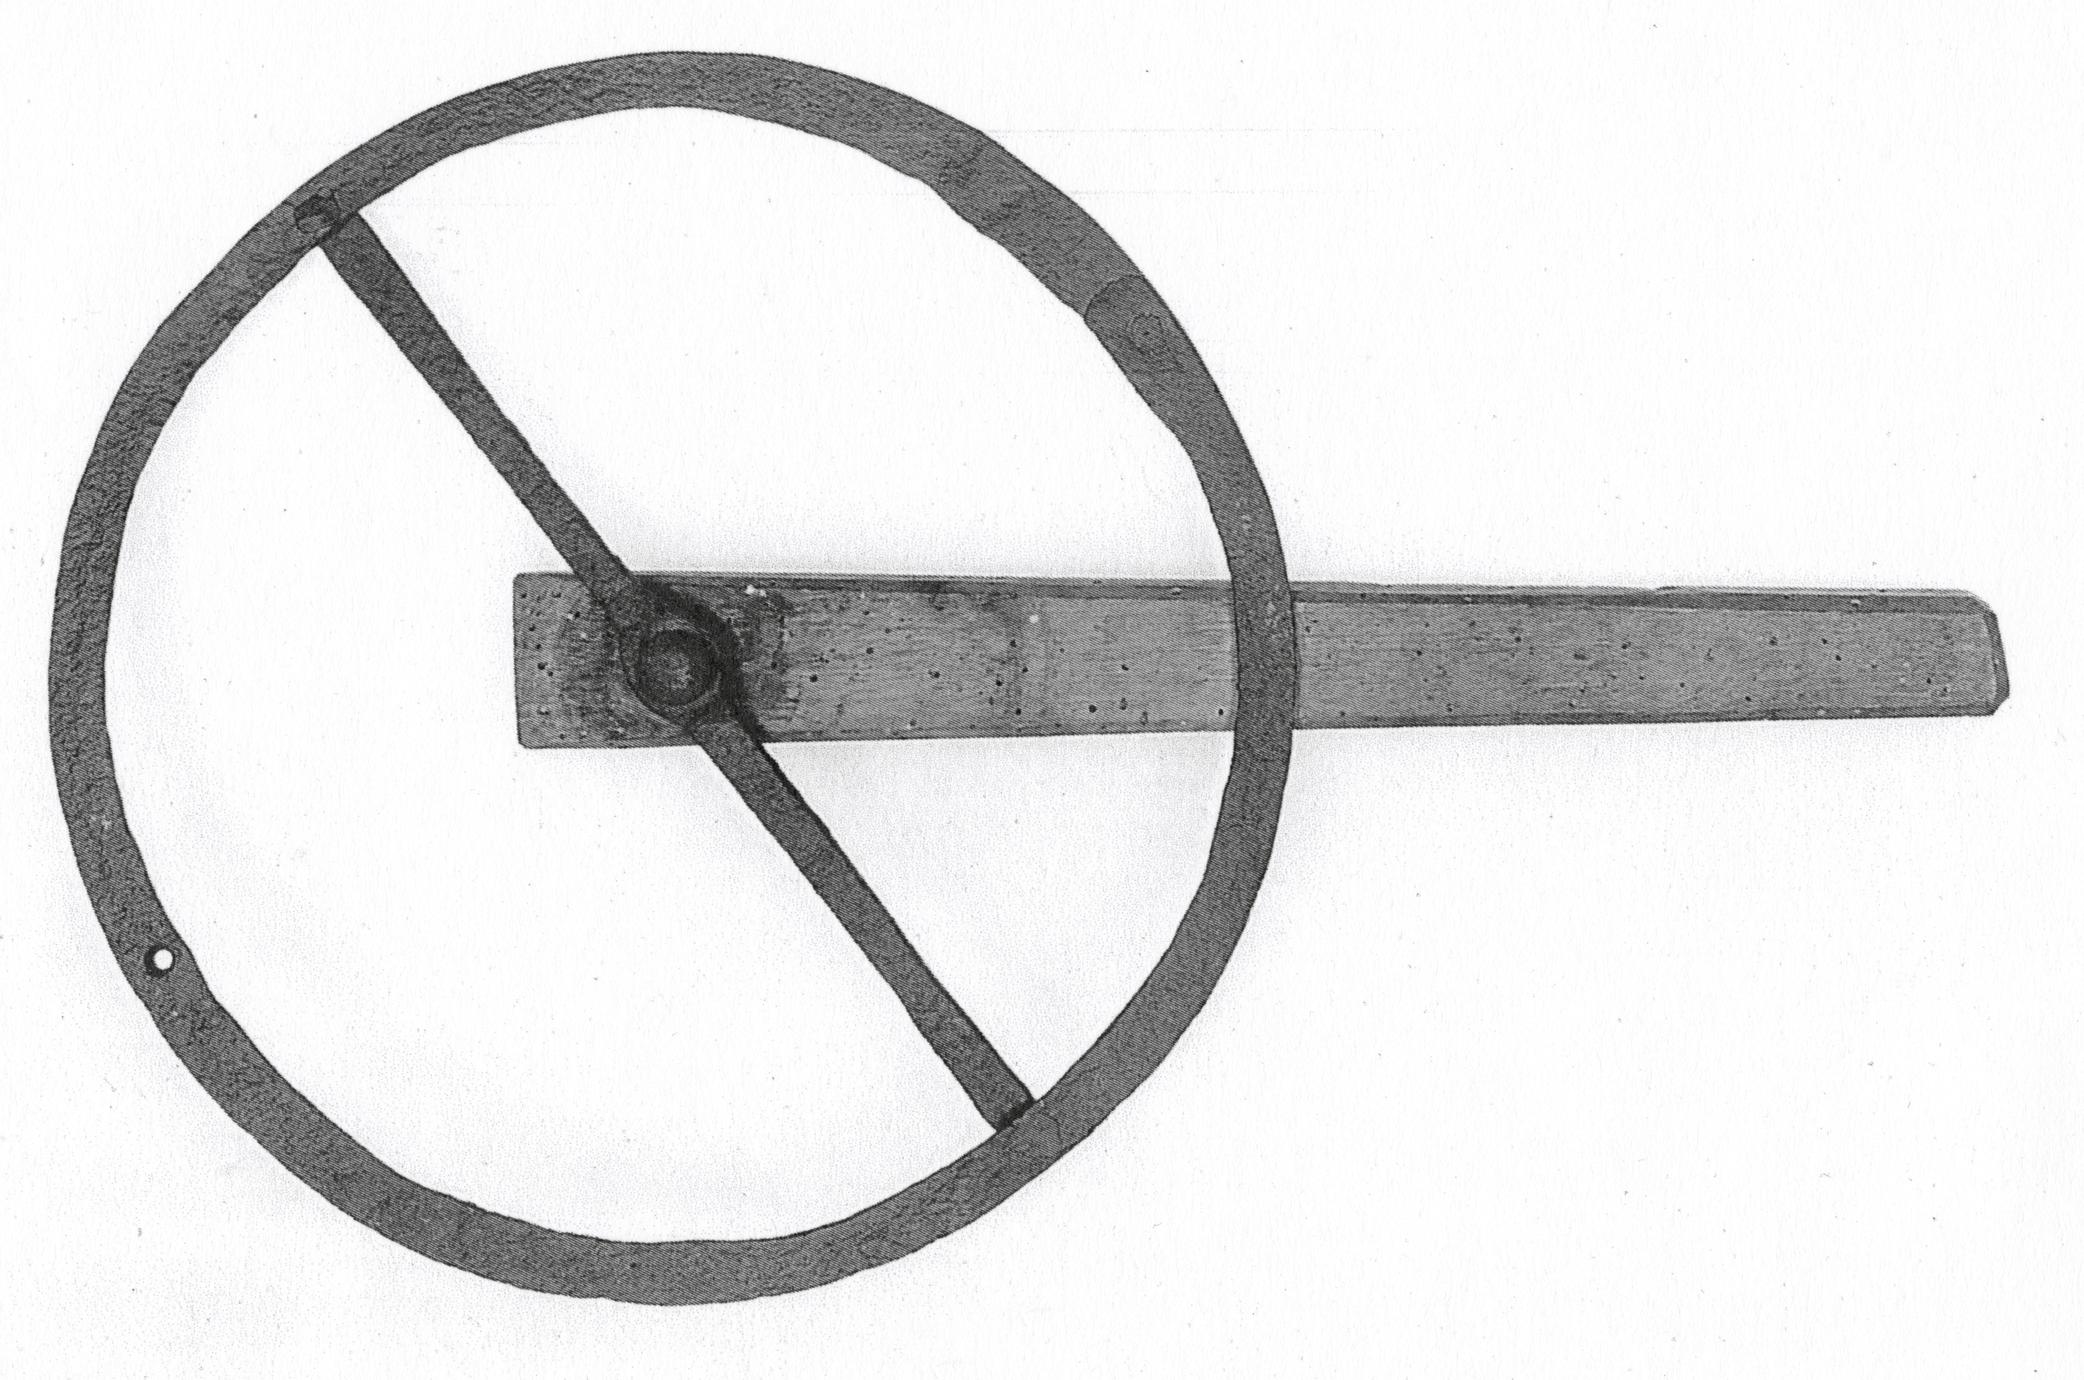 Black and white photograph of a traverse wheel or traveler.